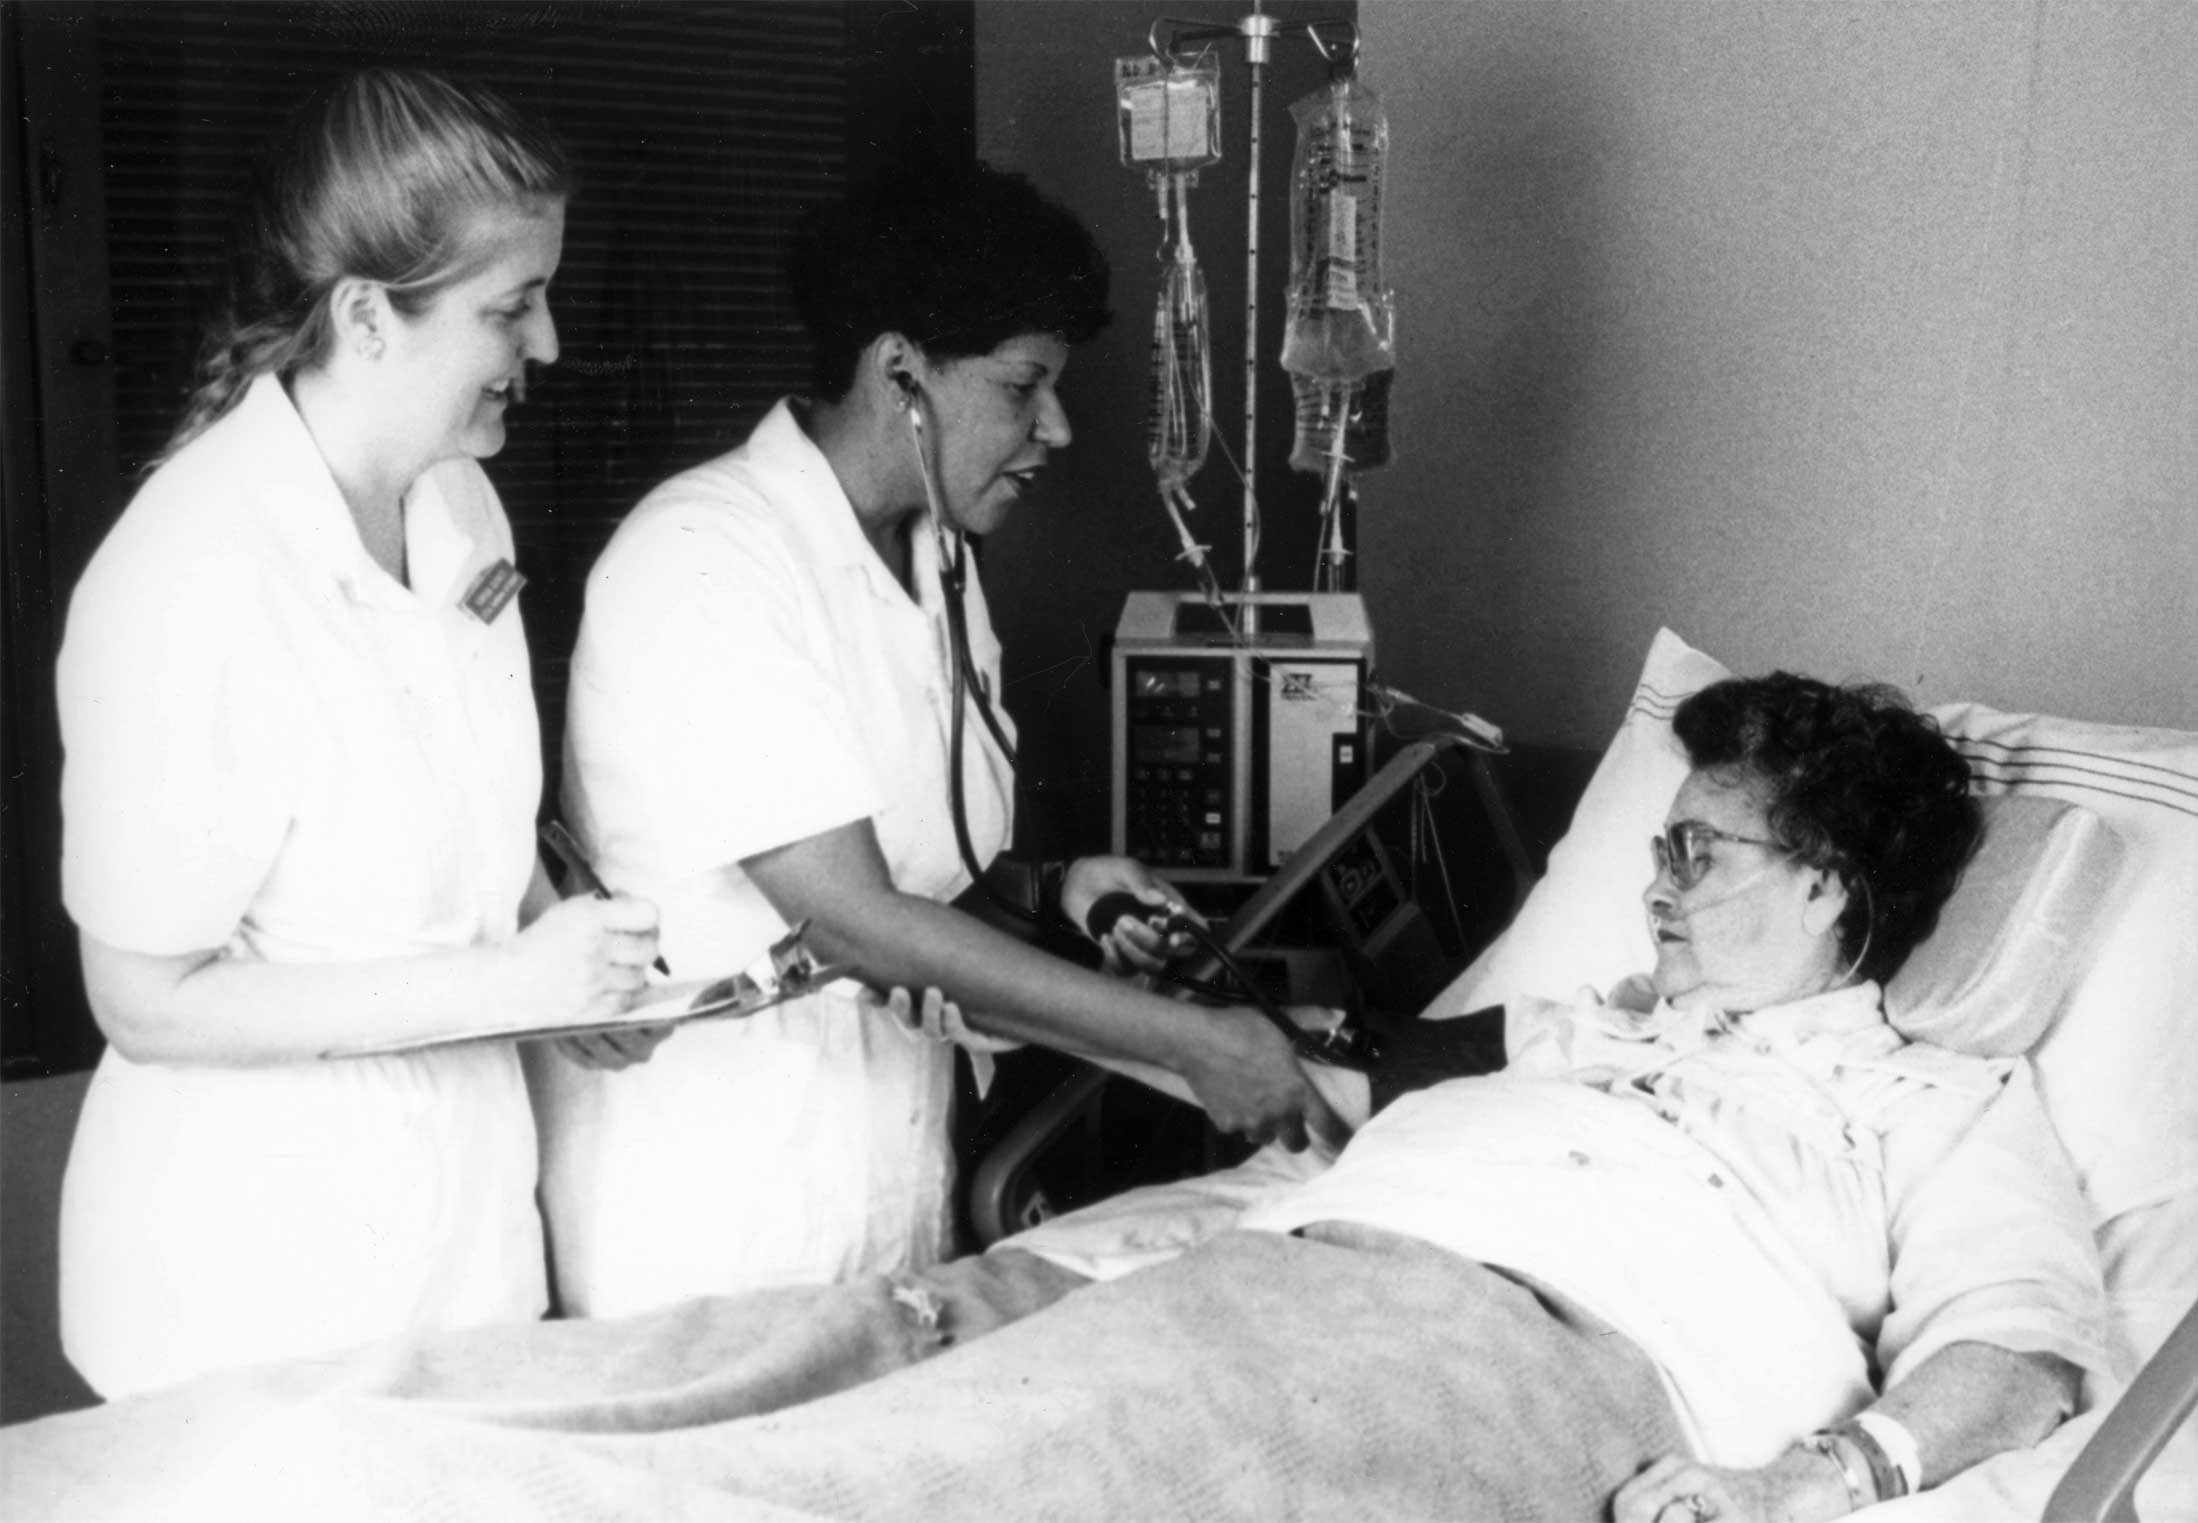 Nurse taking the bloog pressure of a patient lying in a hospital bed while another nurse looks on